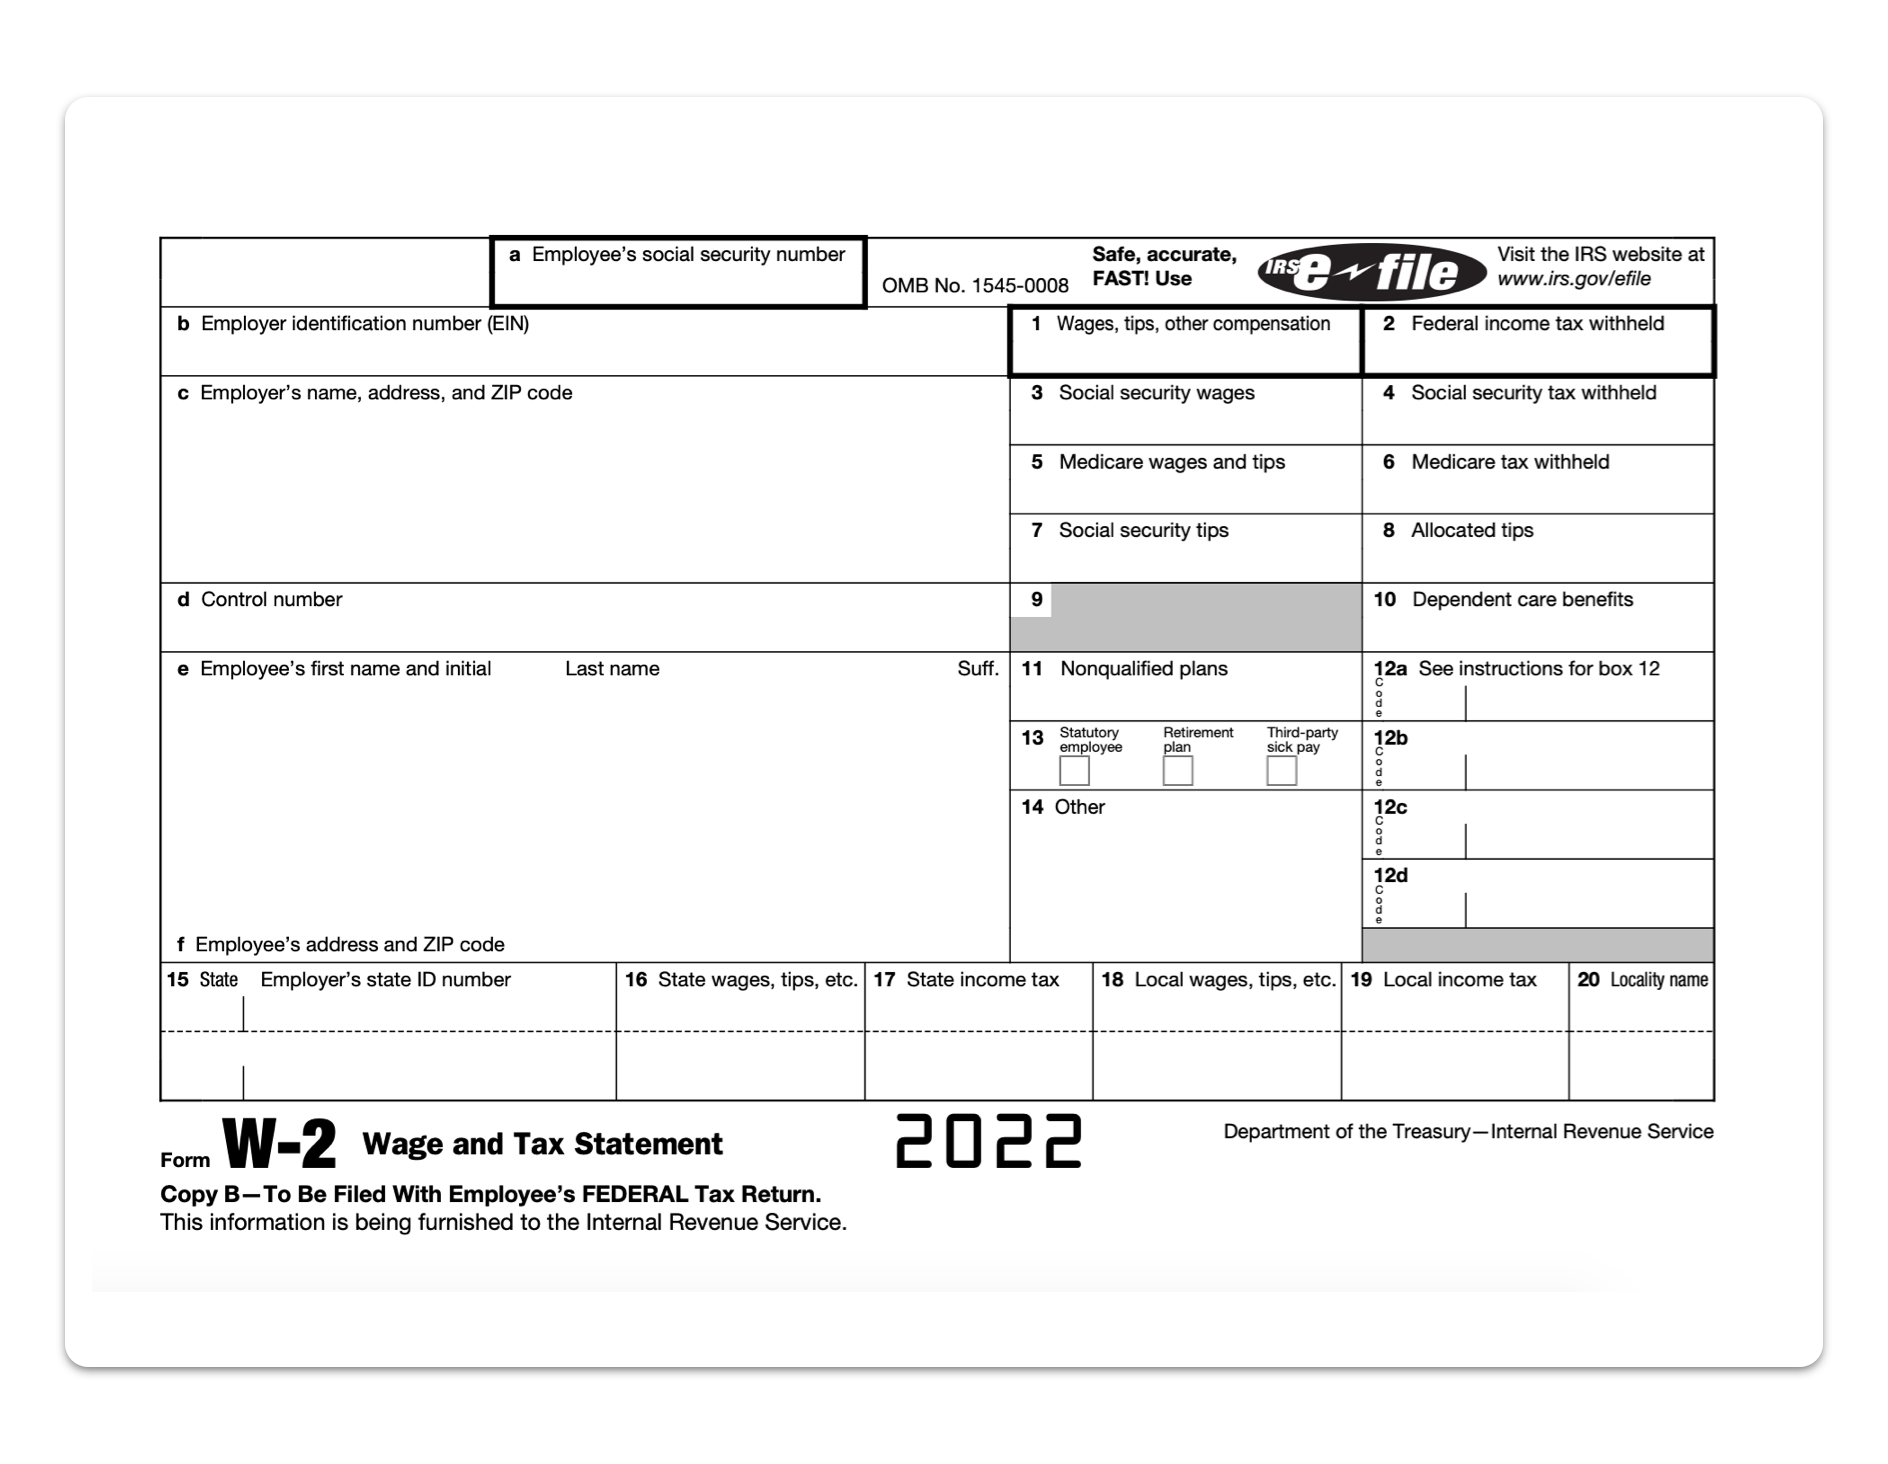 Your Guide To The W-2 Form: Wage And Tax Statement - Hourly, Inc. regarding How To Make A W2 Form